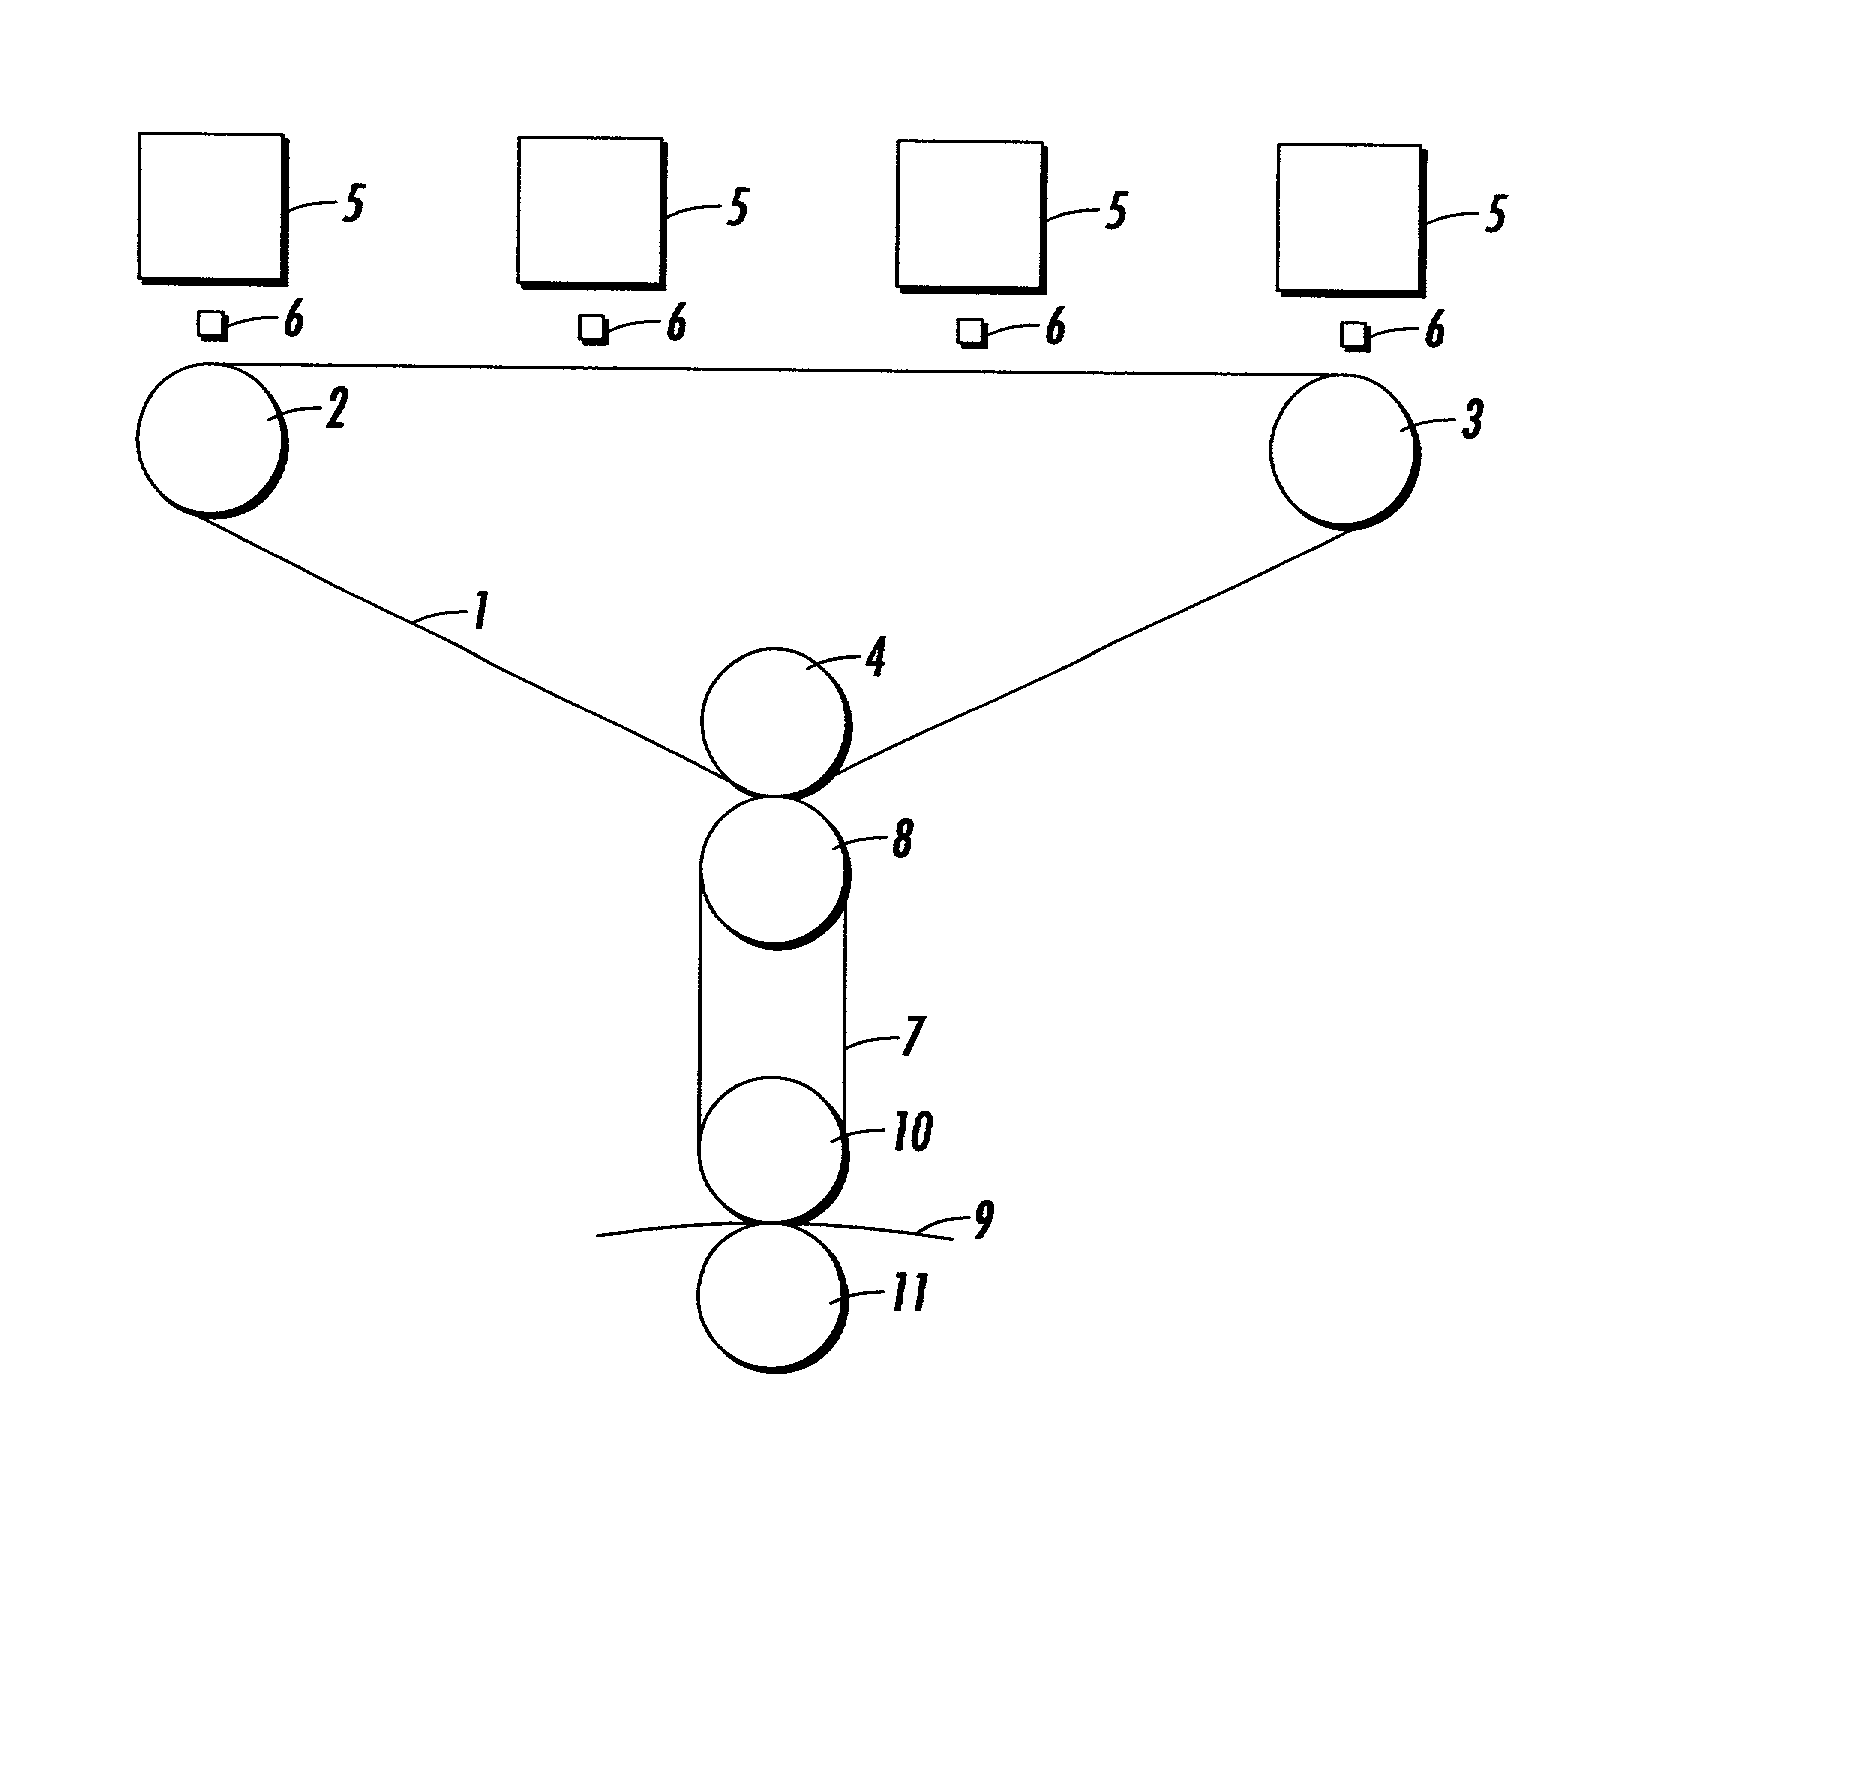 Transfix component having fluorosilicone outer layer